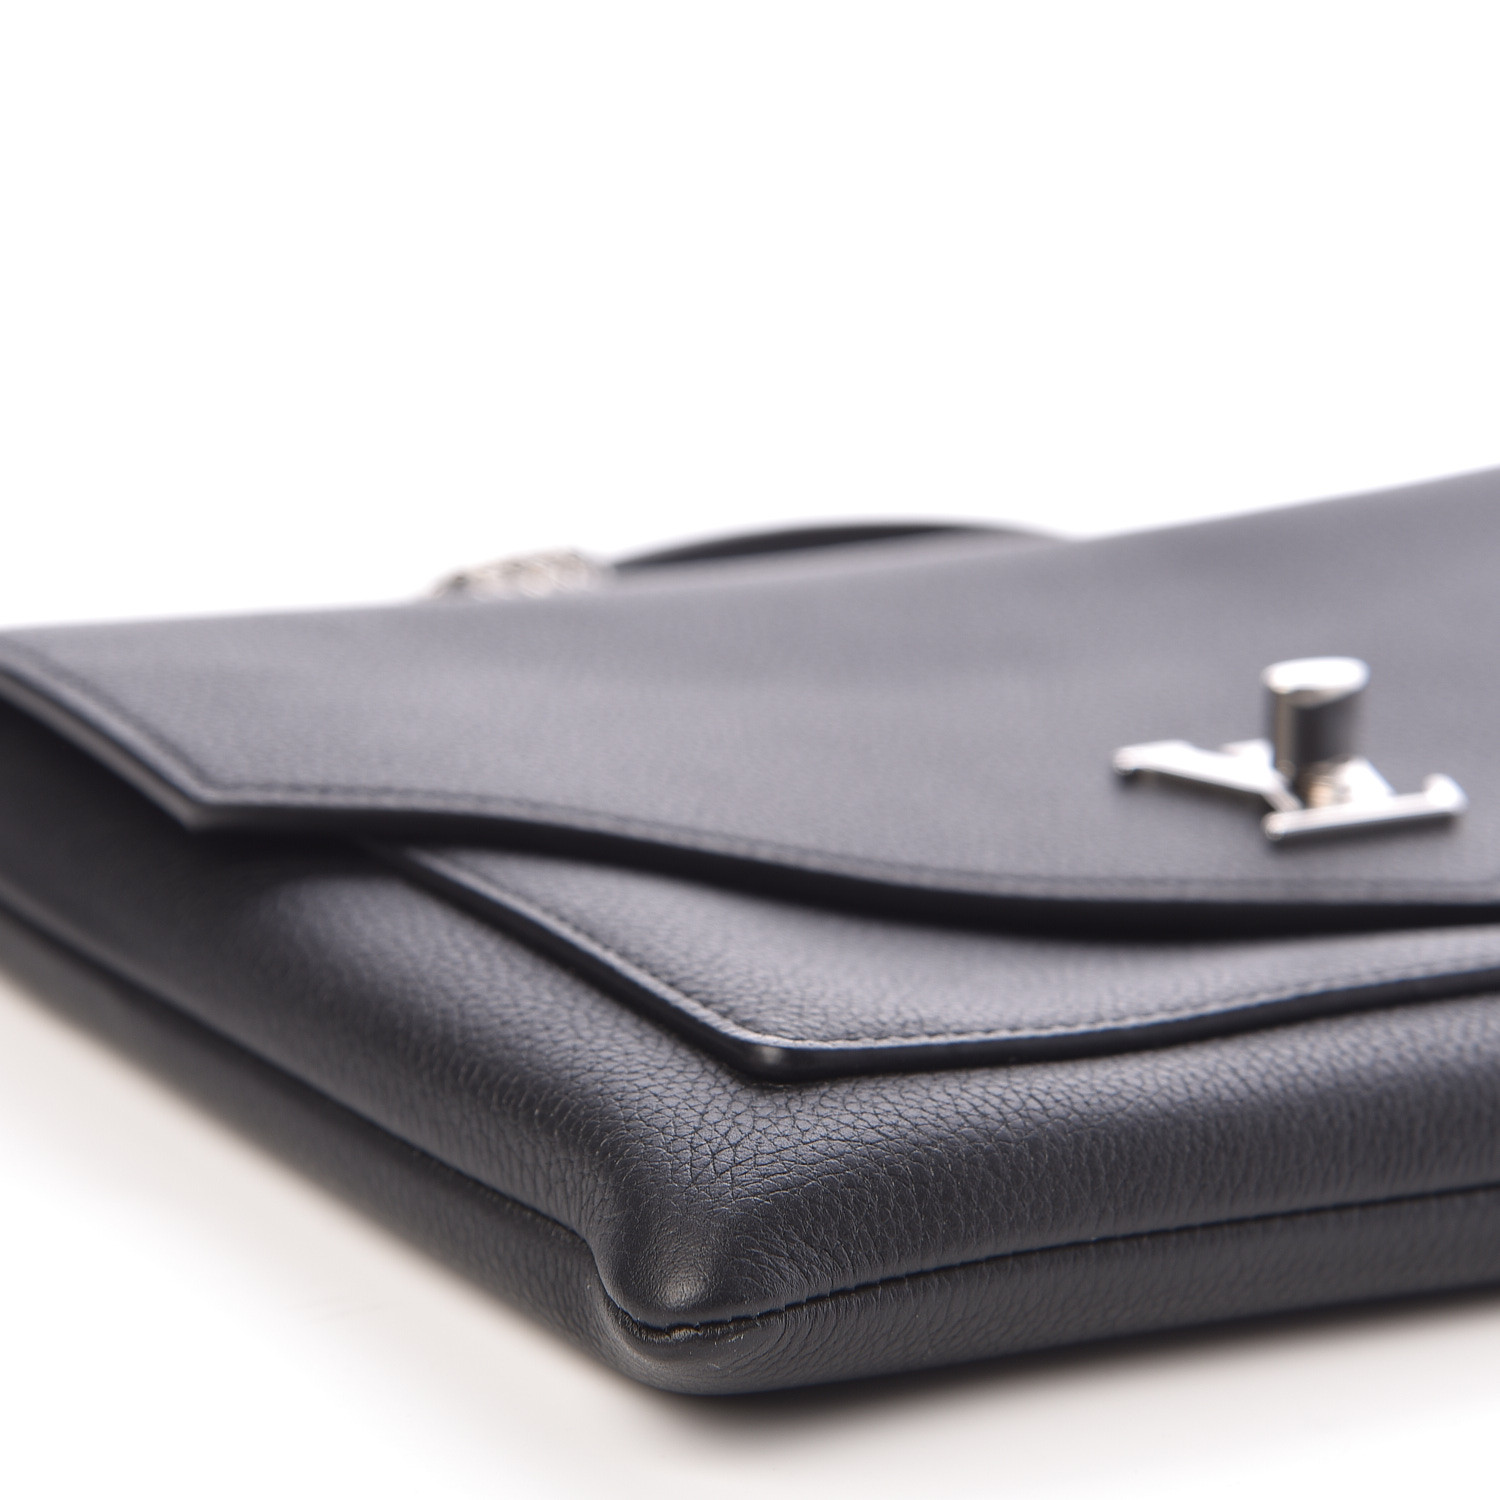 Mylockme Chain Pochette Lockme Leather - Wallets and Small Leather Goods